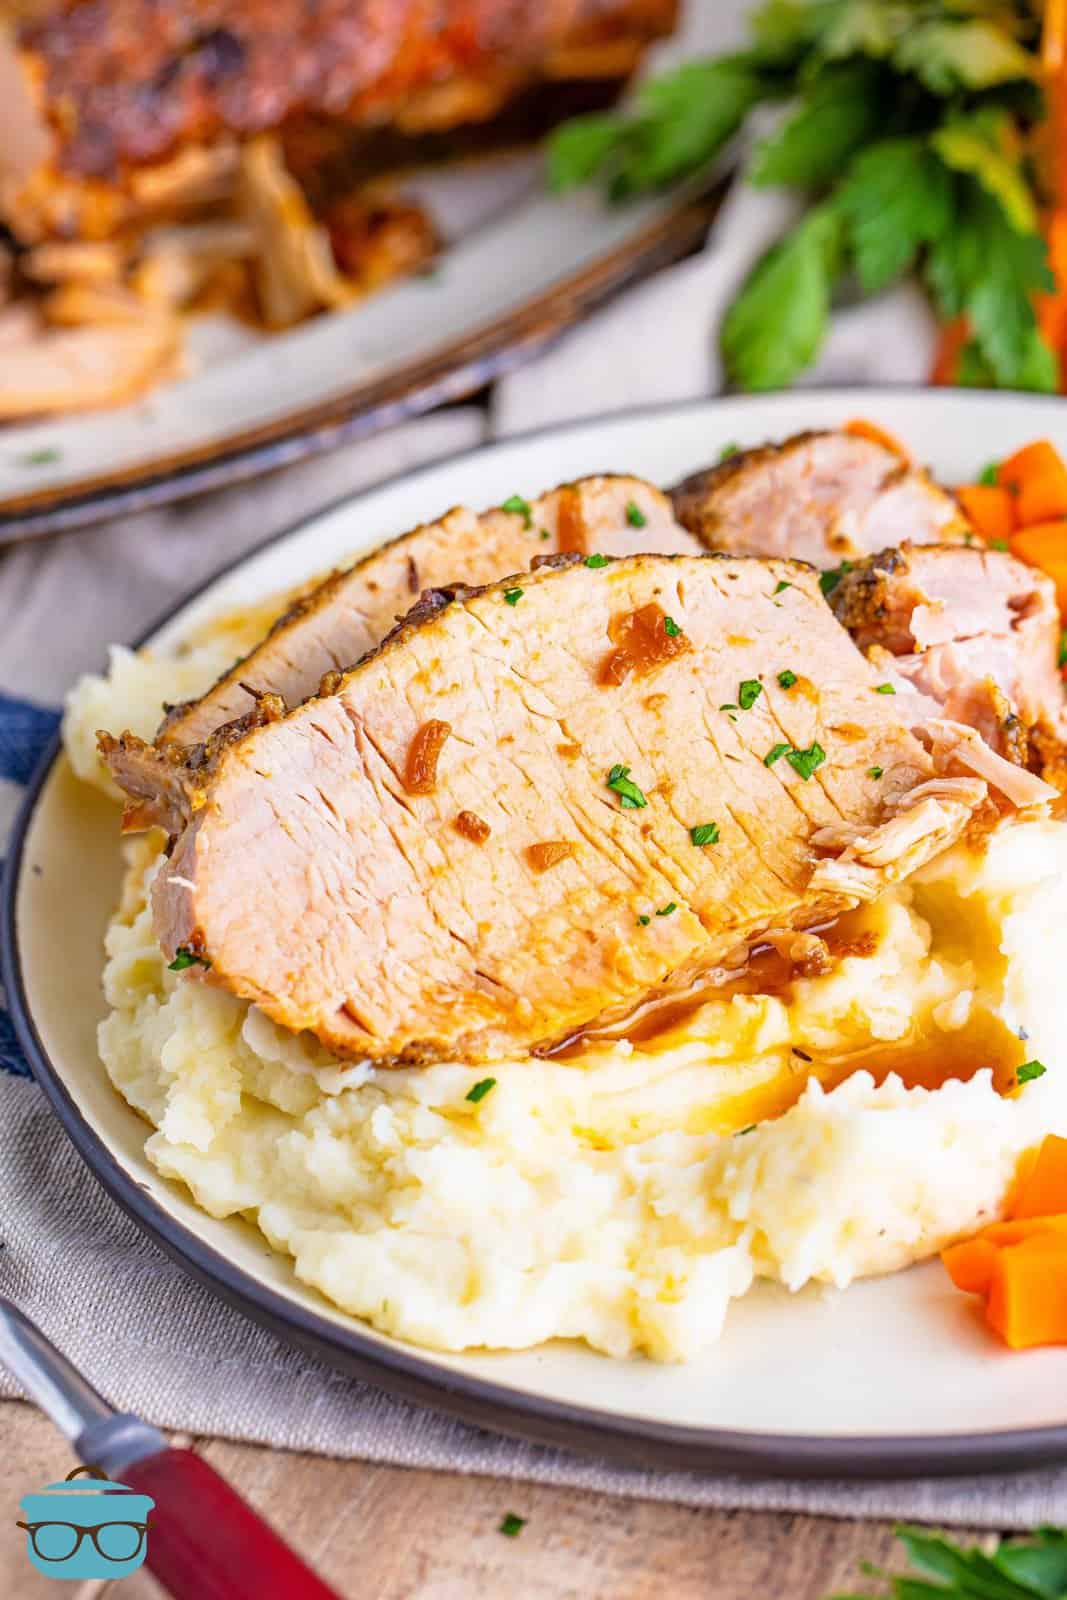 A plate of mashed potatoes with a few slices of Pork Loin.